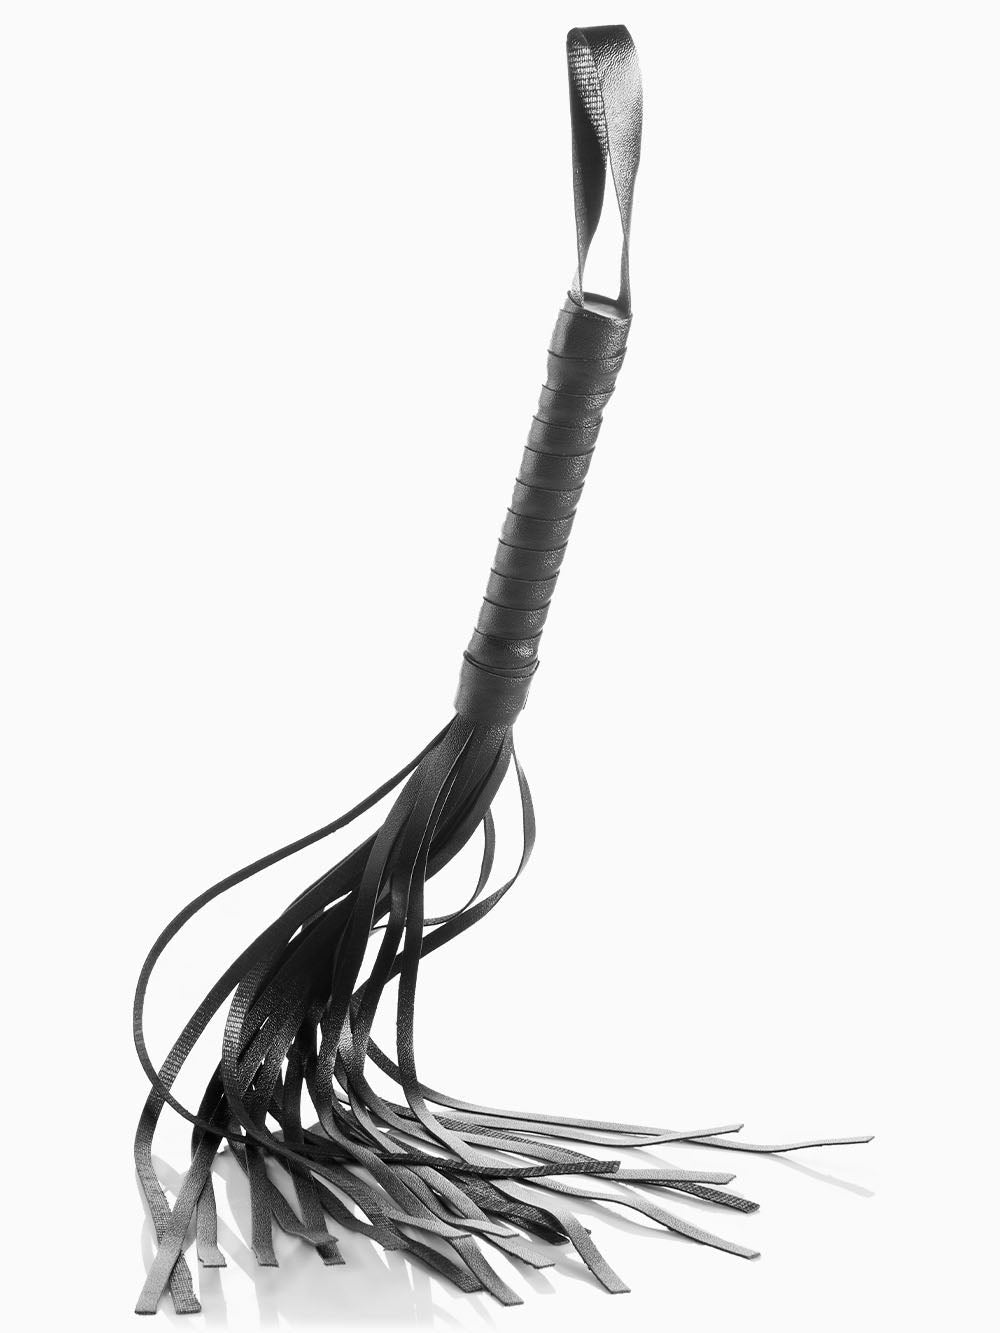 Pillow Talk Faux Leather Flogger Whip